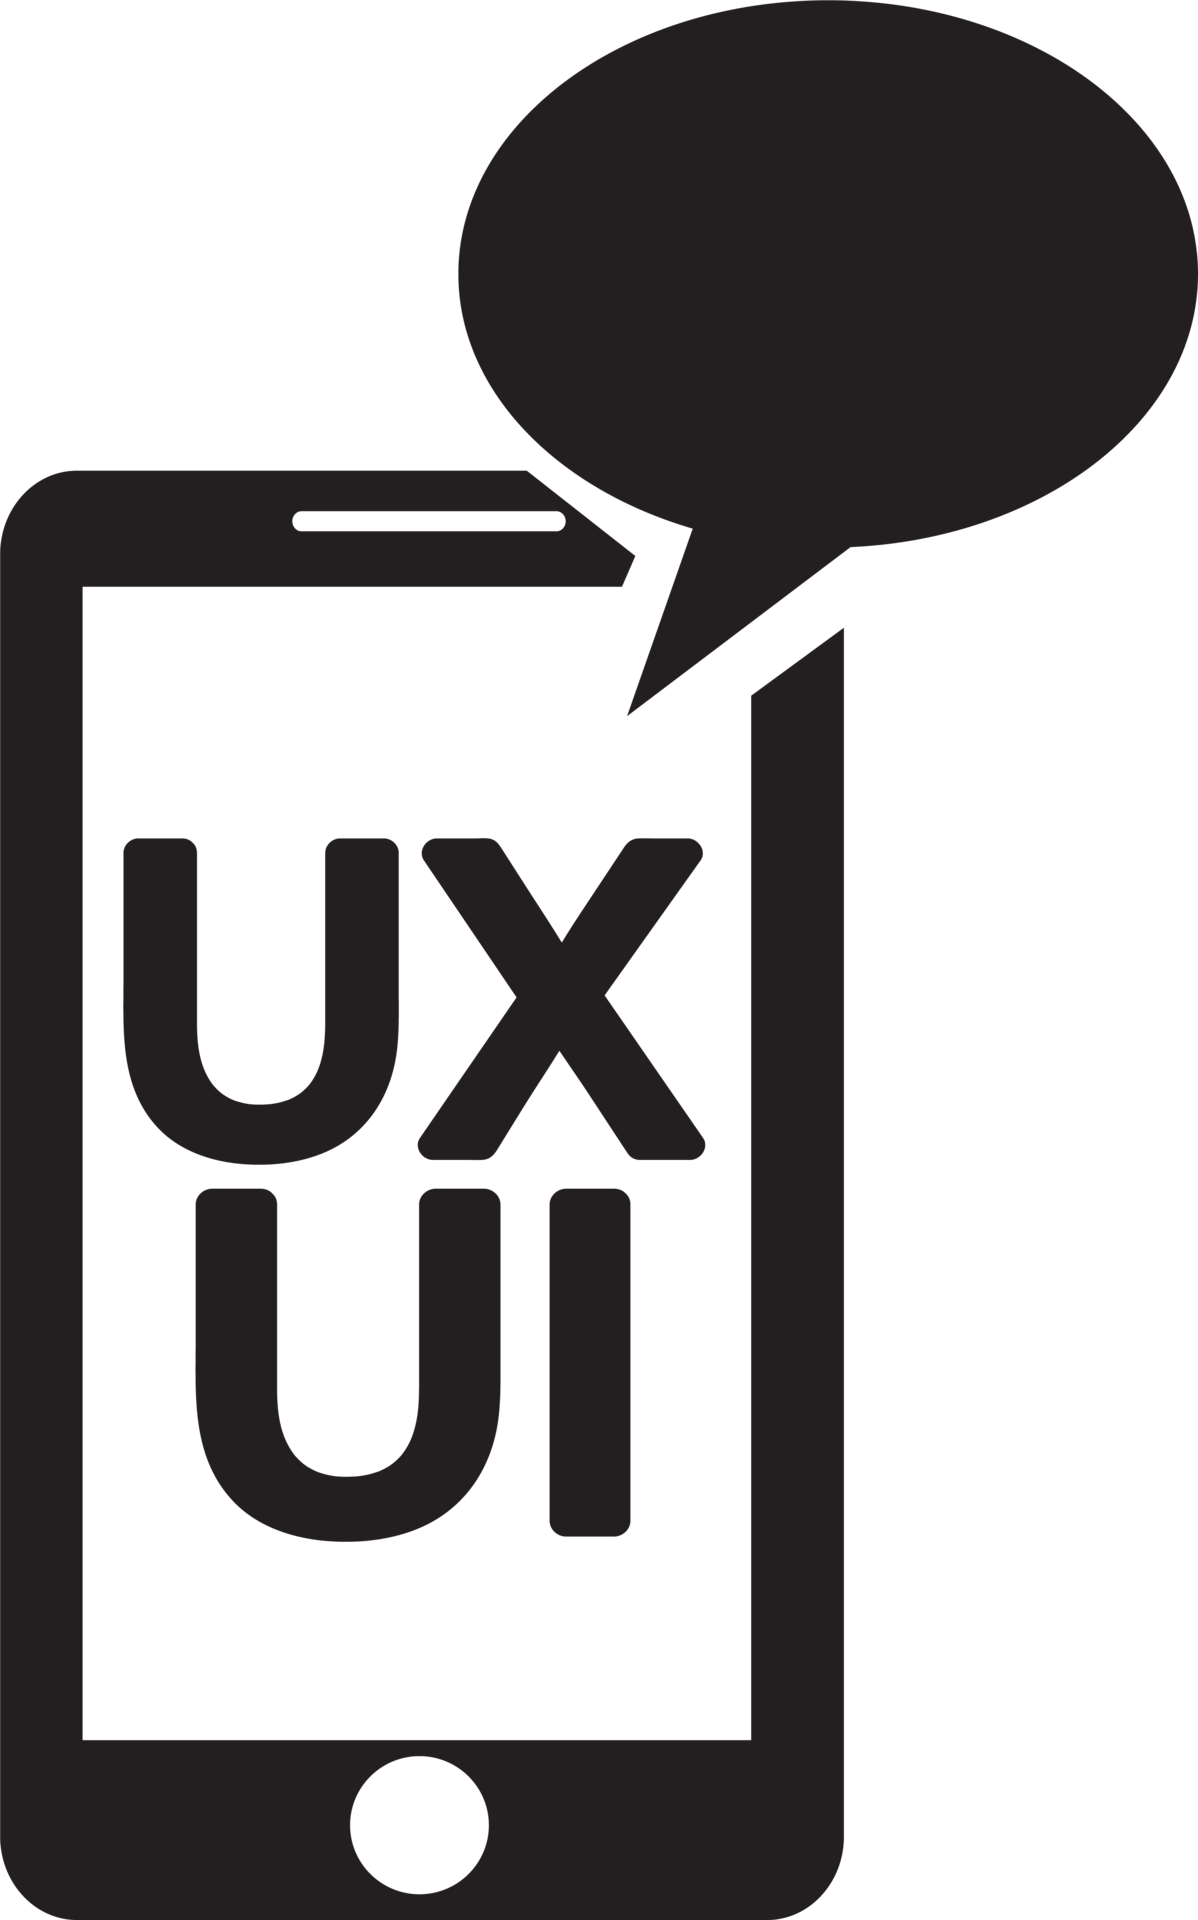 Ui Ux Icon Sign Design 9351734 Png